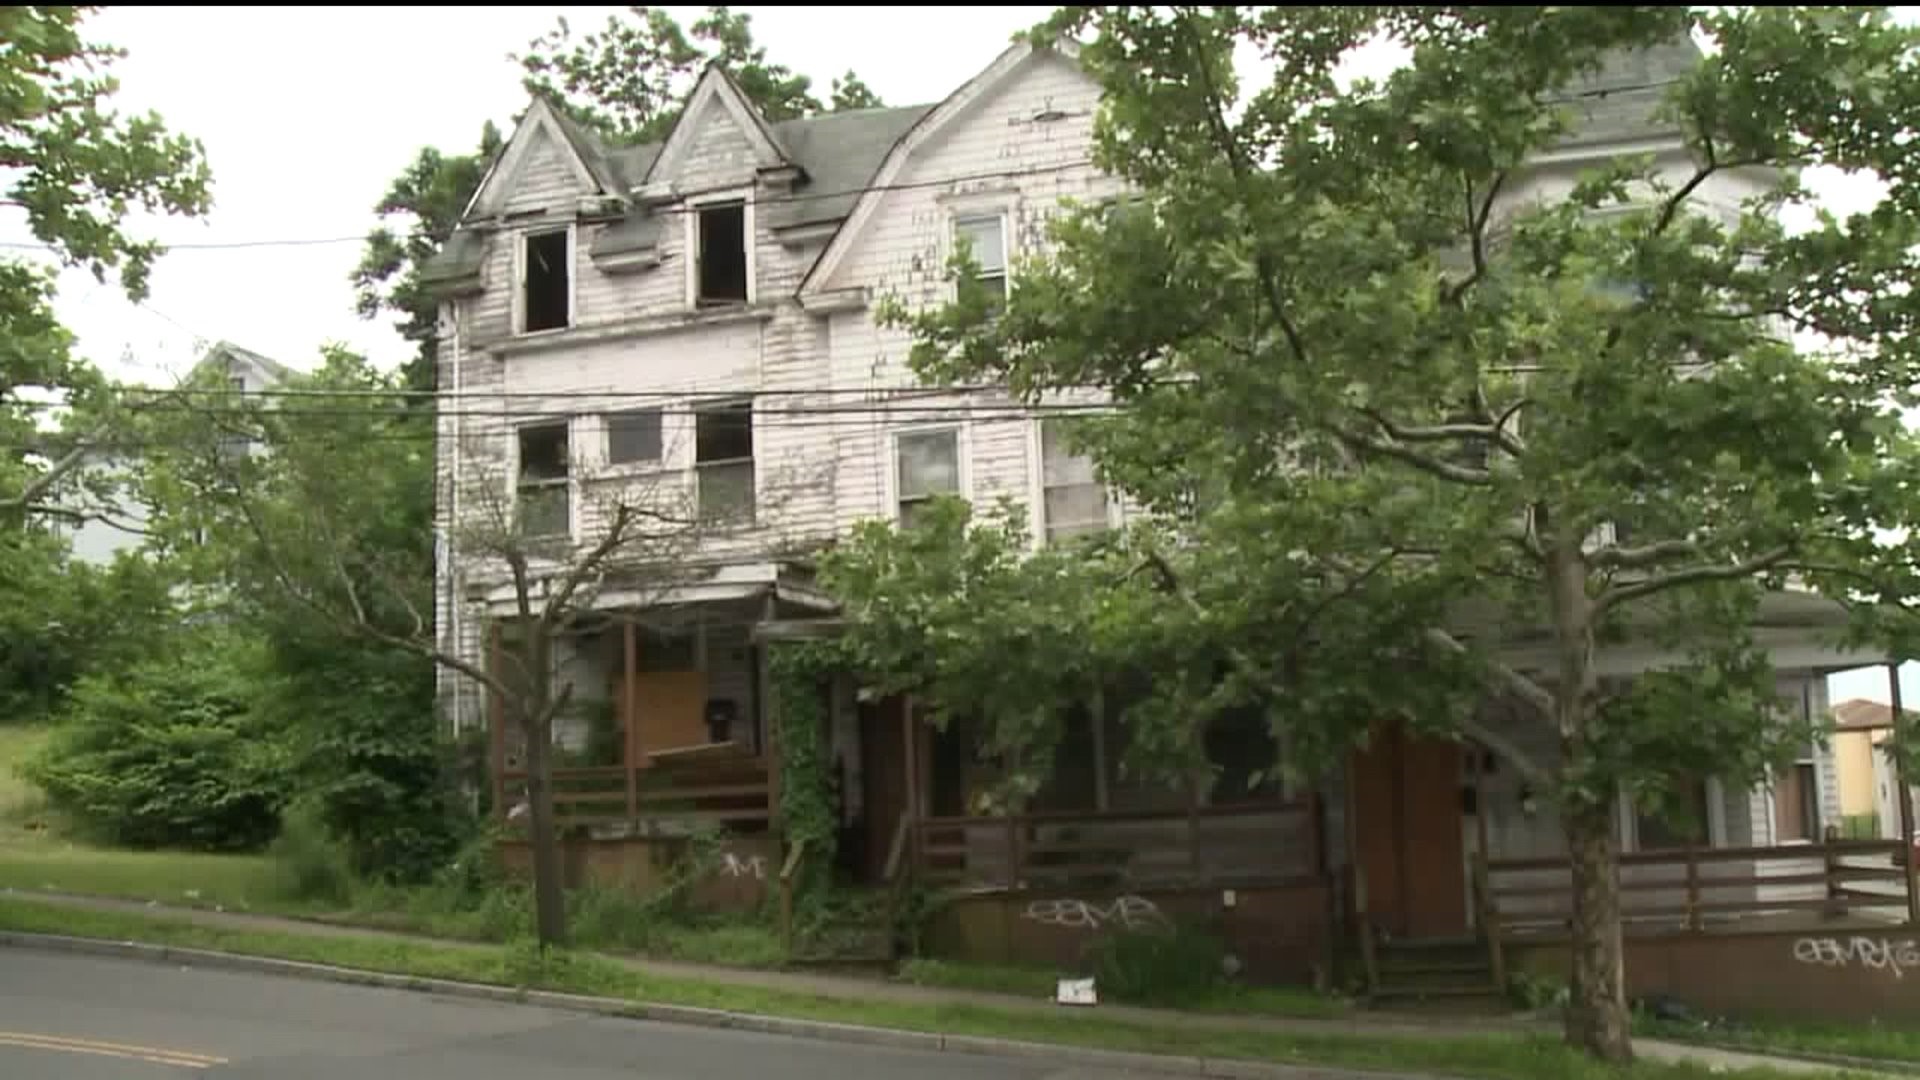 A Call to Take Action on Blighted Properties